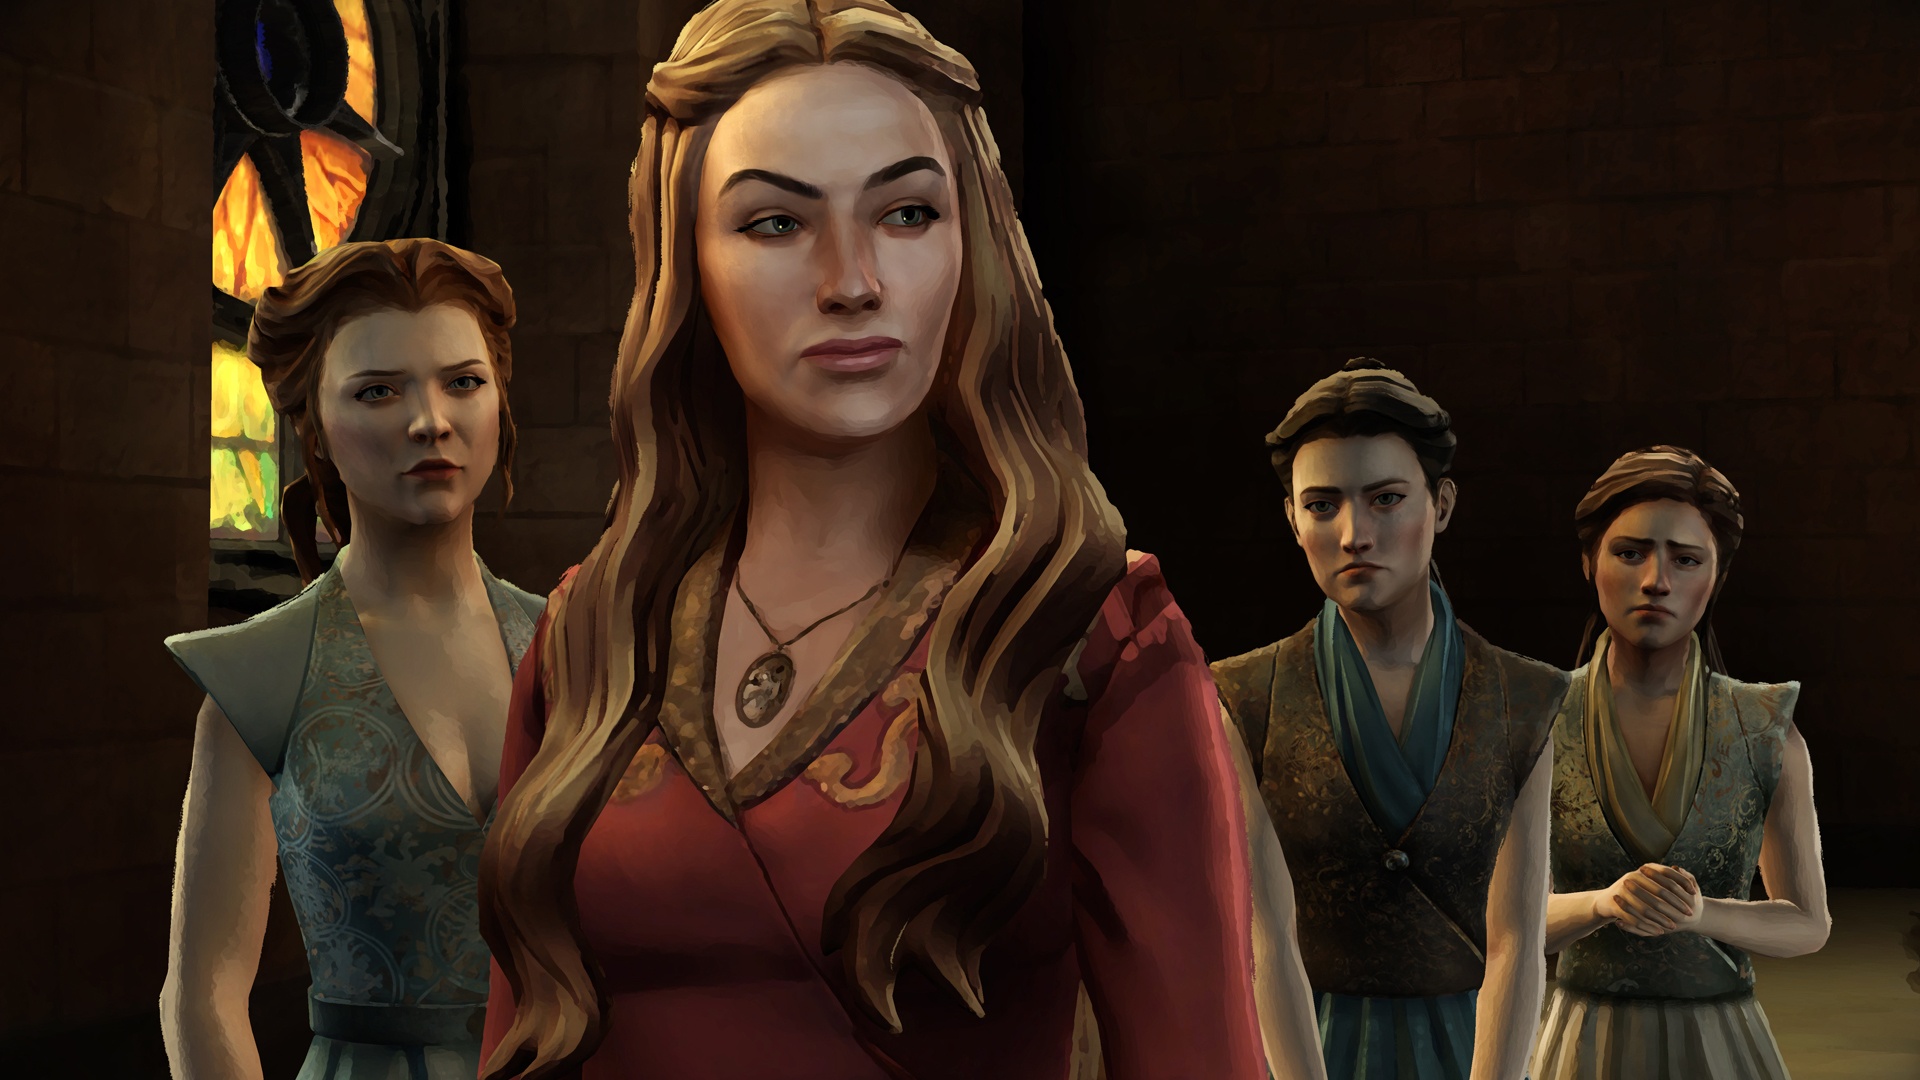 Game Of Thrones - A Telltale Games Series #13